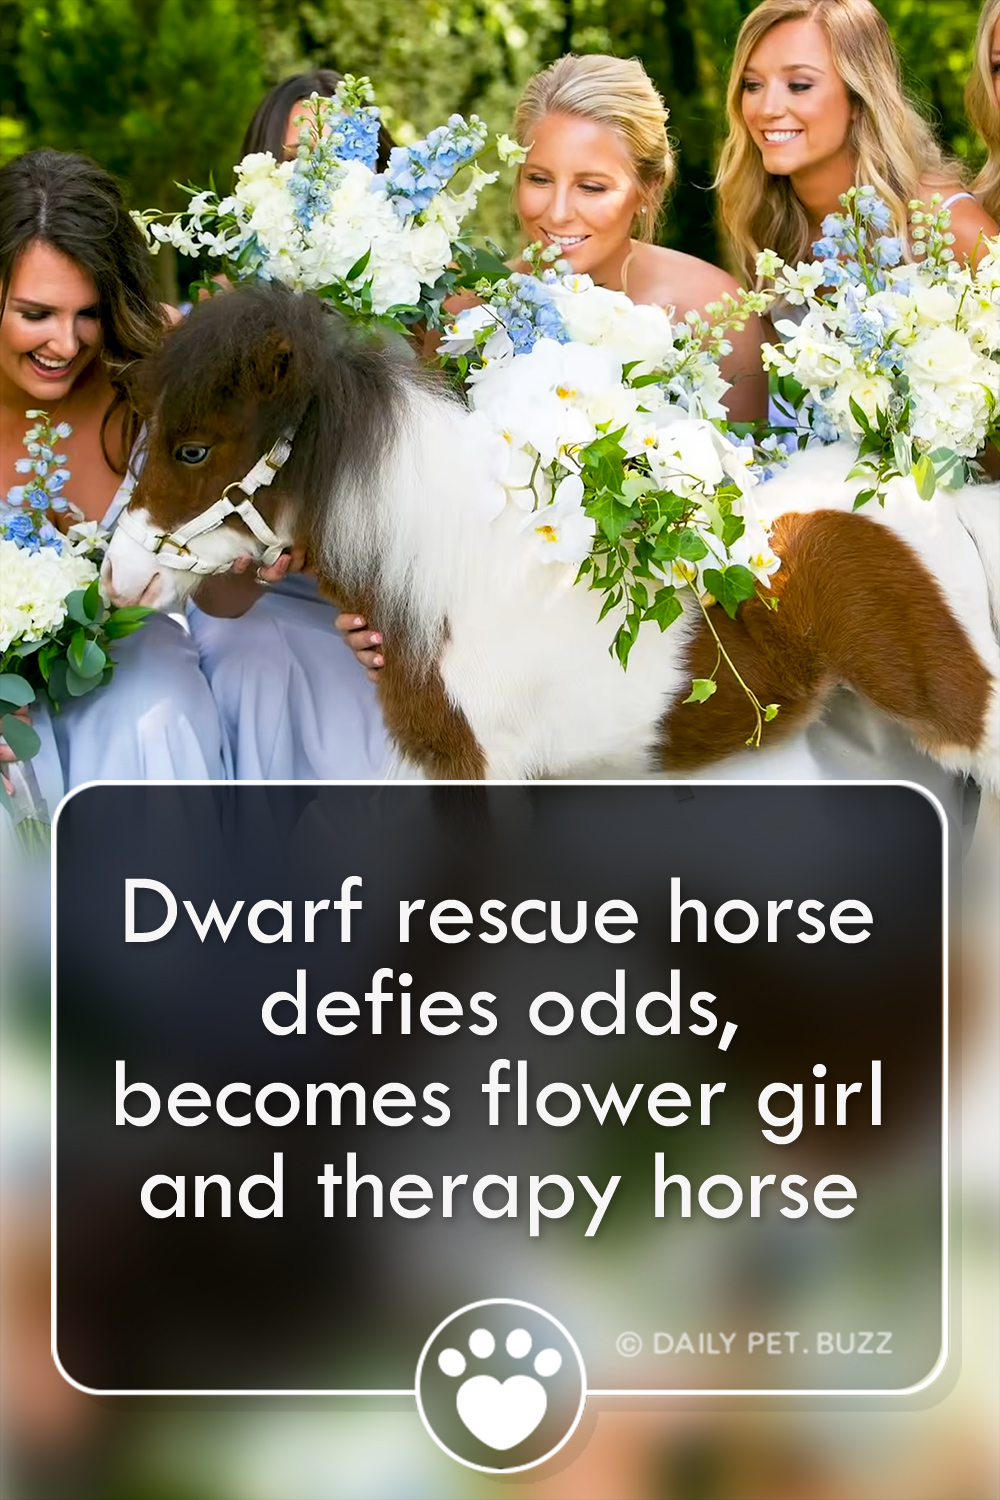 Dwarf rescue horse defies odds, becomes flower girl and therapy horse